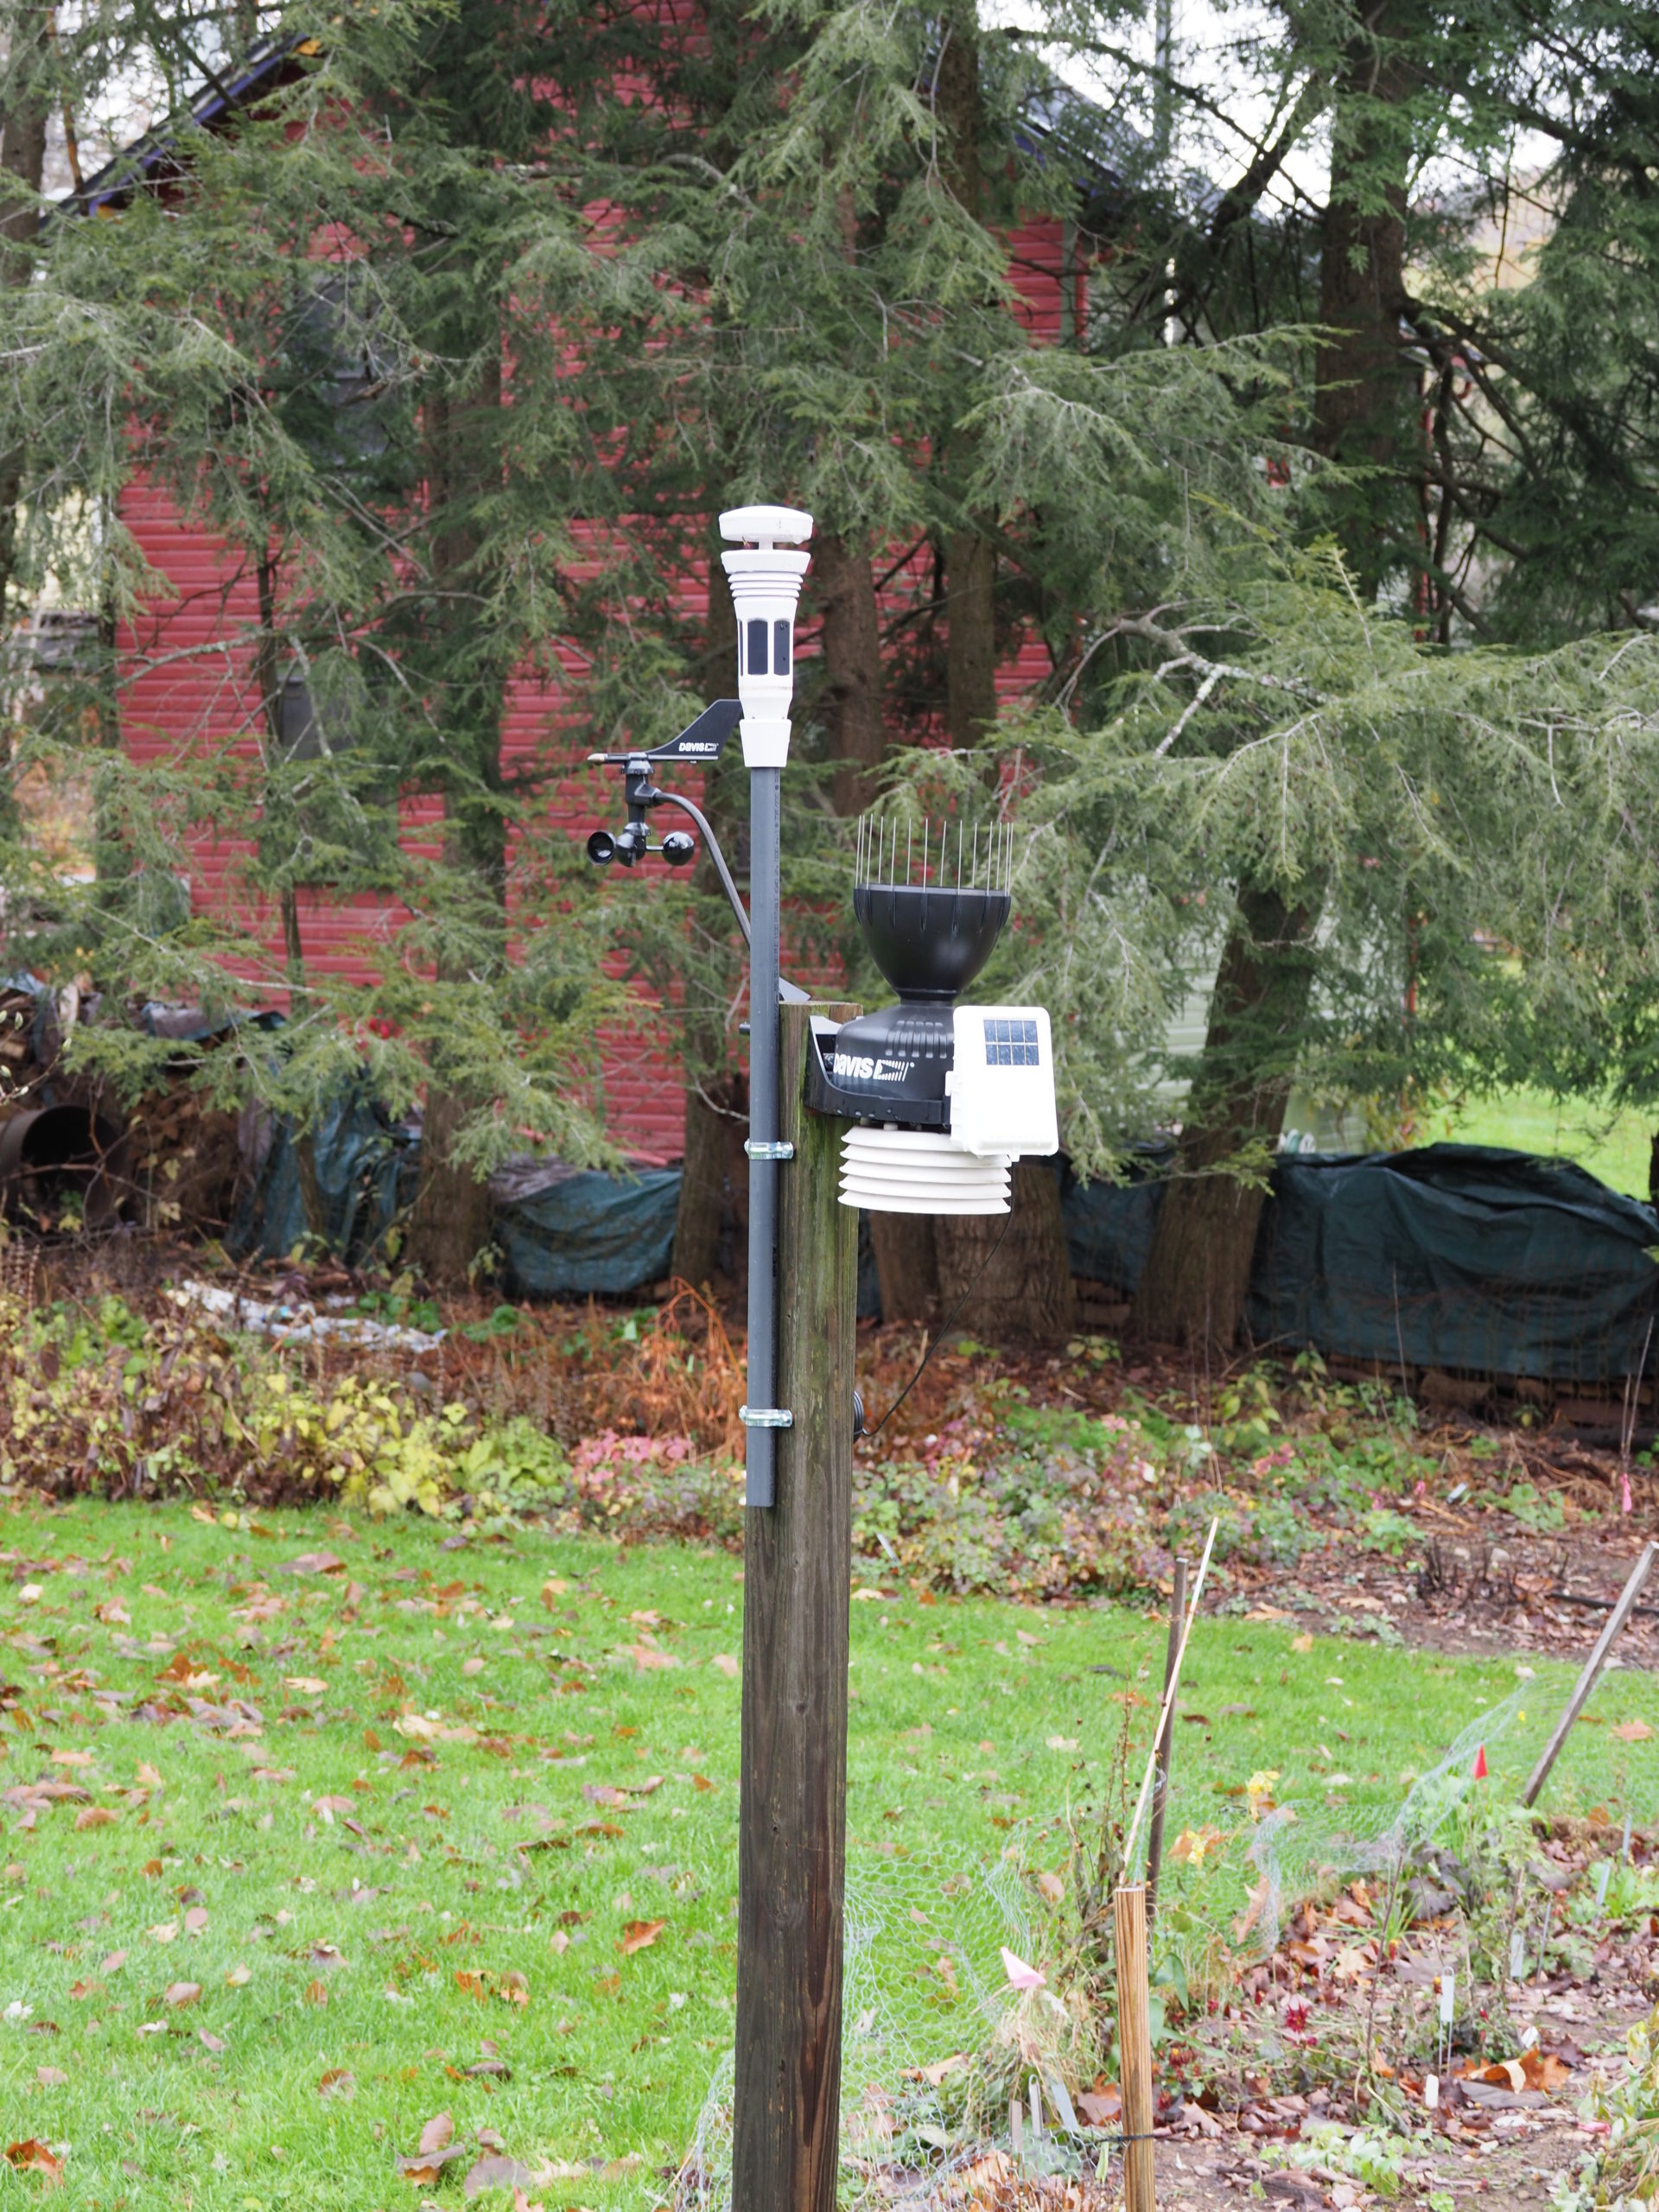 A weather station can be a gardener’s or wannabe meteorologist’s best friend. The device at the top of the gray pole is the totally self-contained Tempest model. To its right is the Vantage Pro 2 with its mechanical anemometer on the left. Both are solar powered and transmit wirelessly to an receiver that’s indoors. The Tempest has a lightening detector that will send alerts to a cellphone when lightening strikes occur within 25 miles.